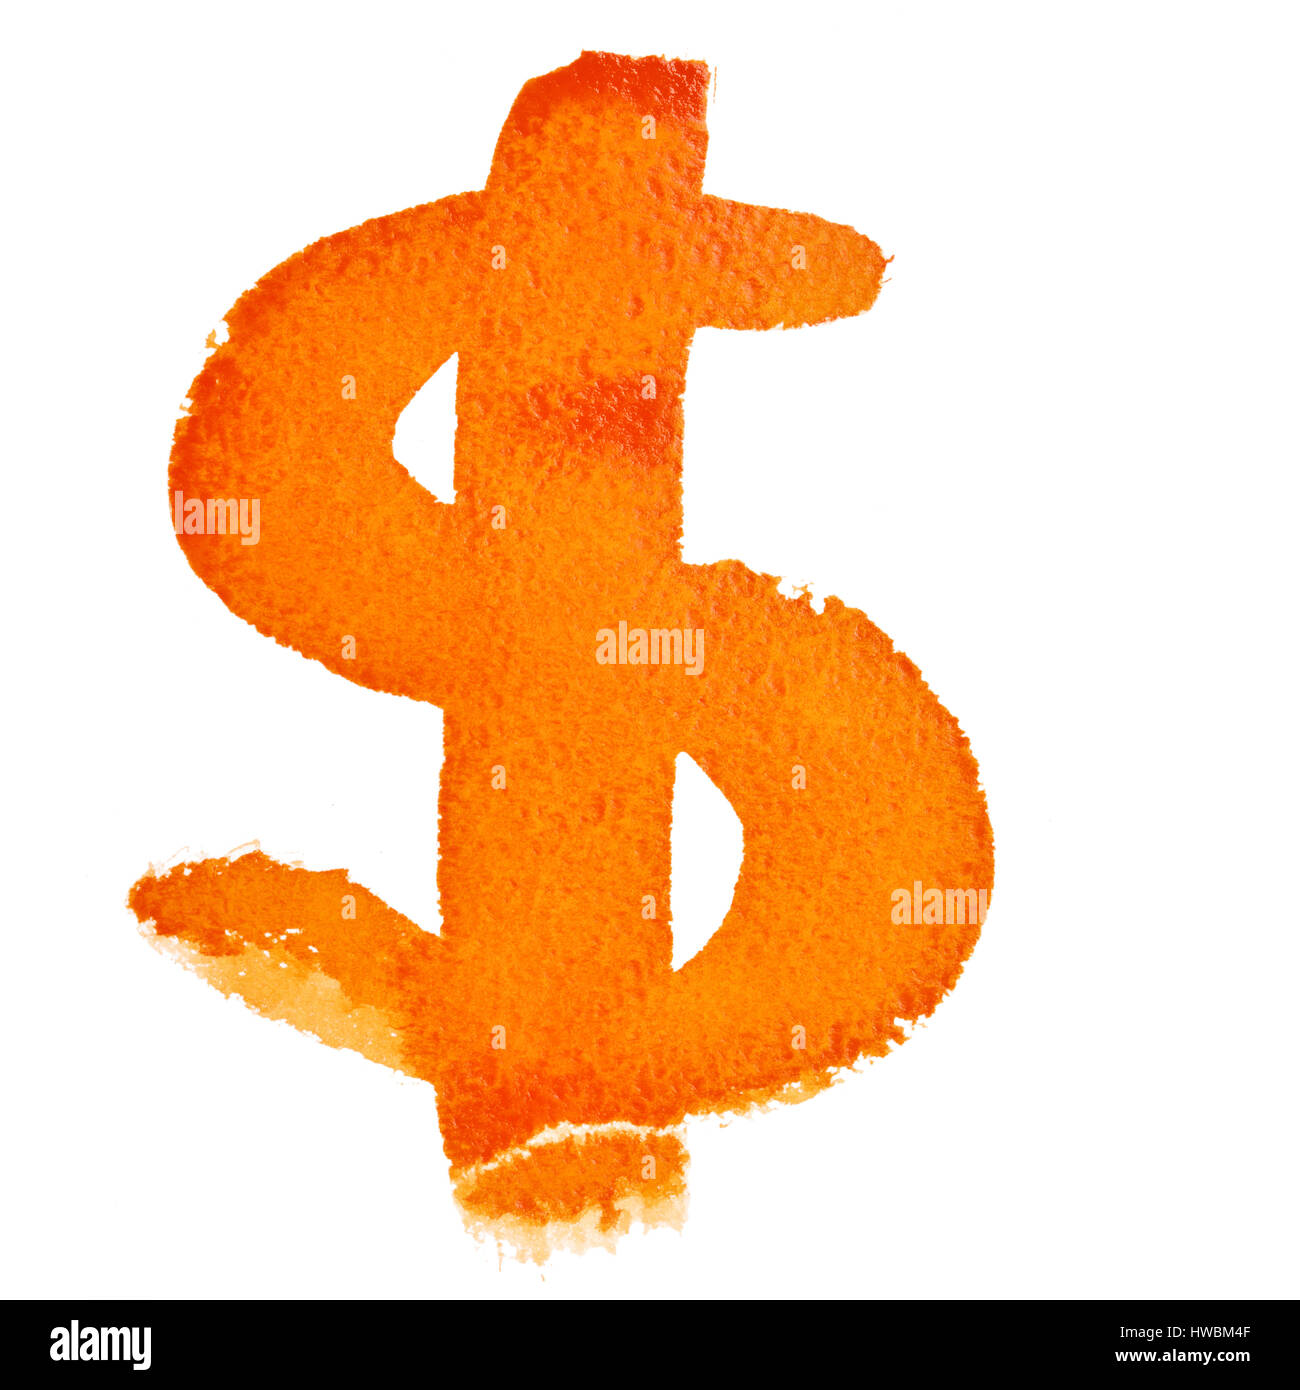 Watercolor dollar sign over the white background Stock Photo